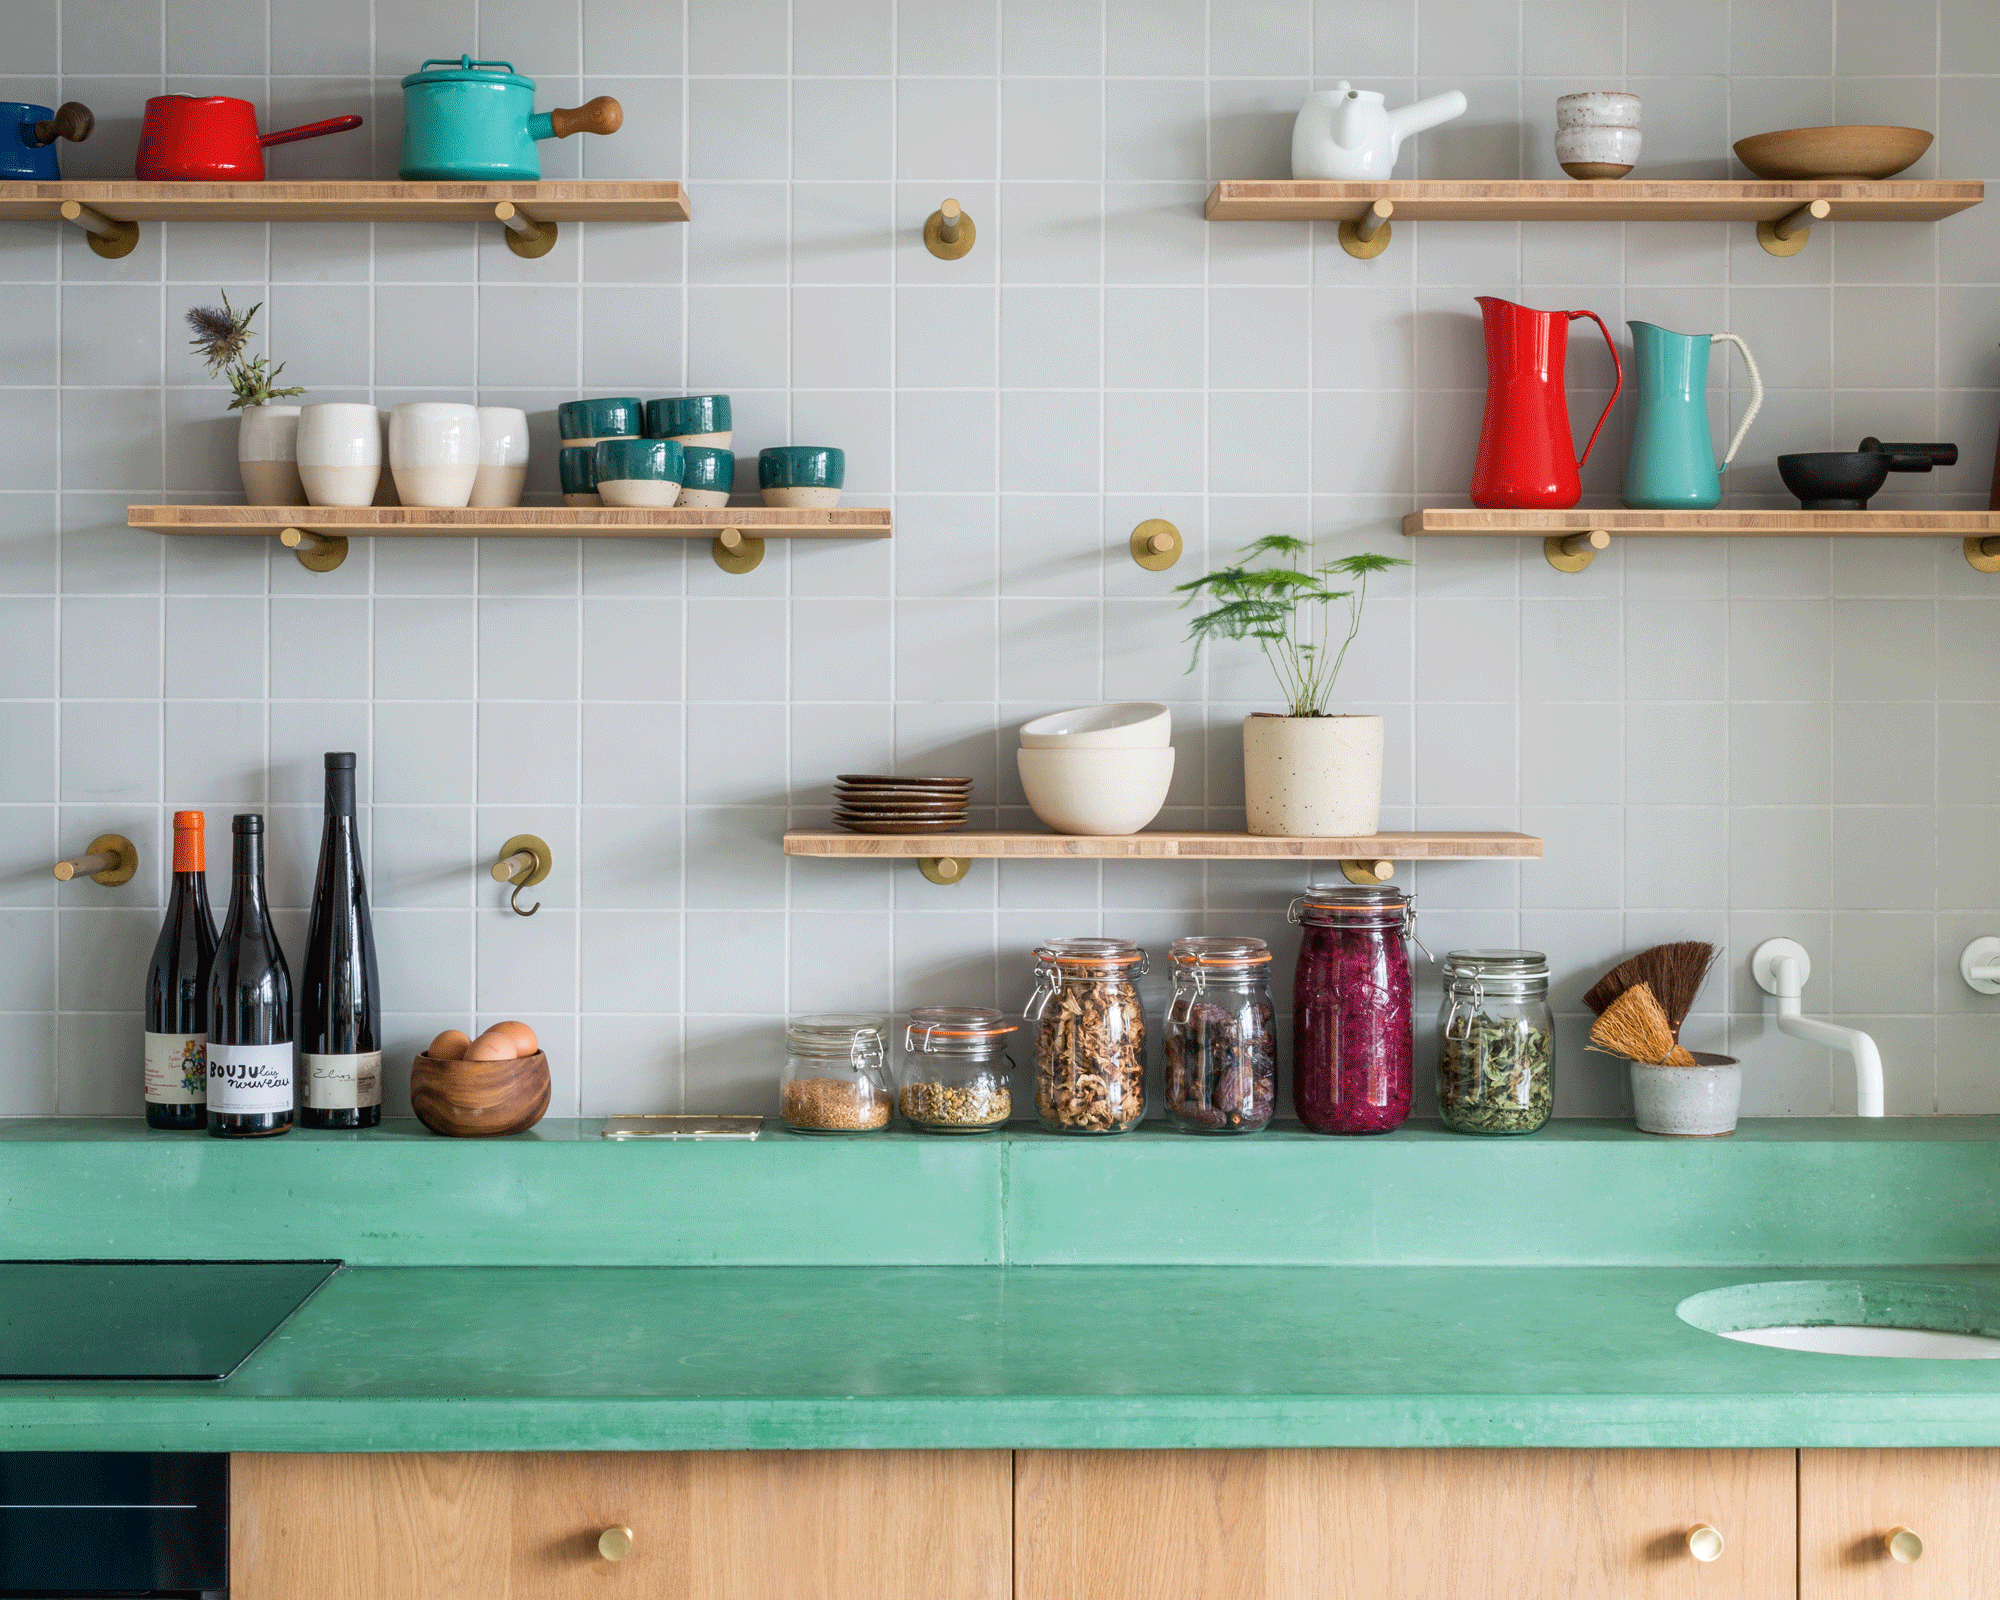 A green concrete kitchen worktop with open shelving above it